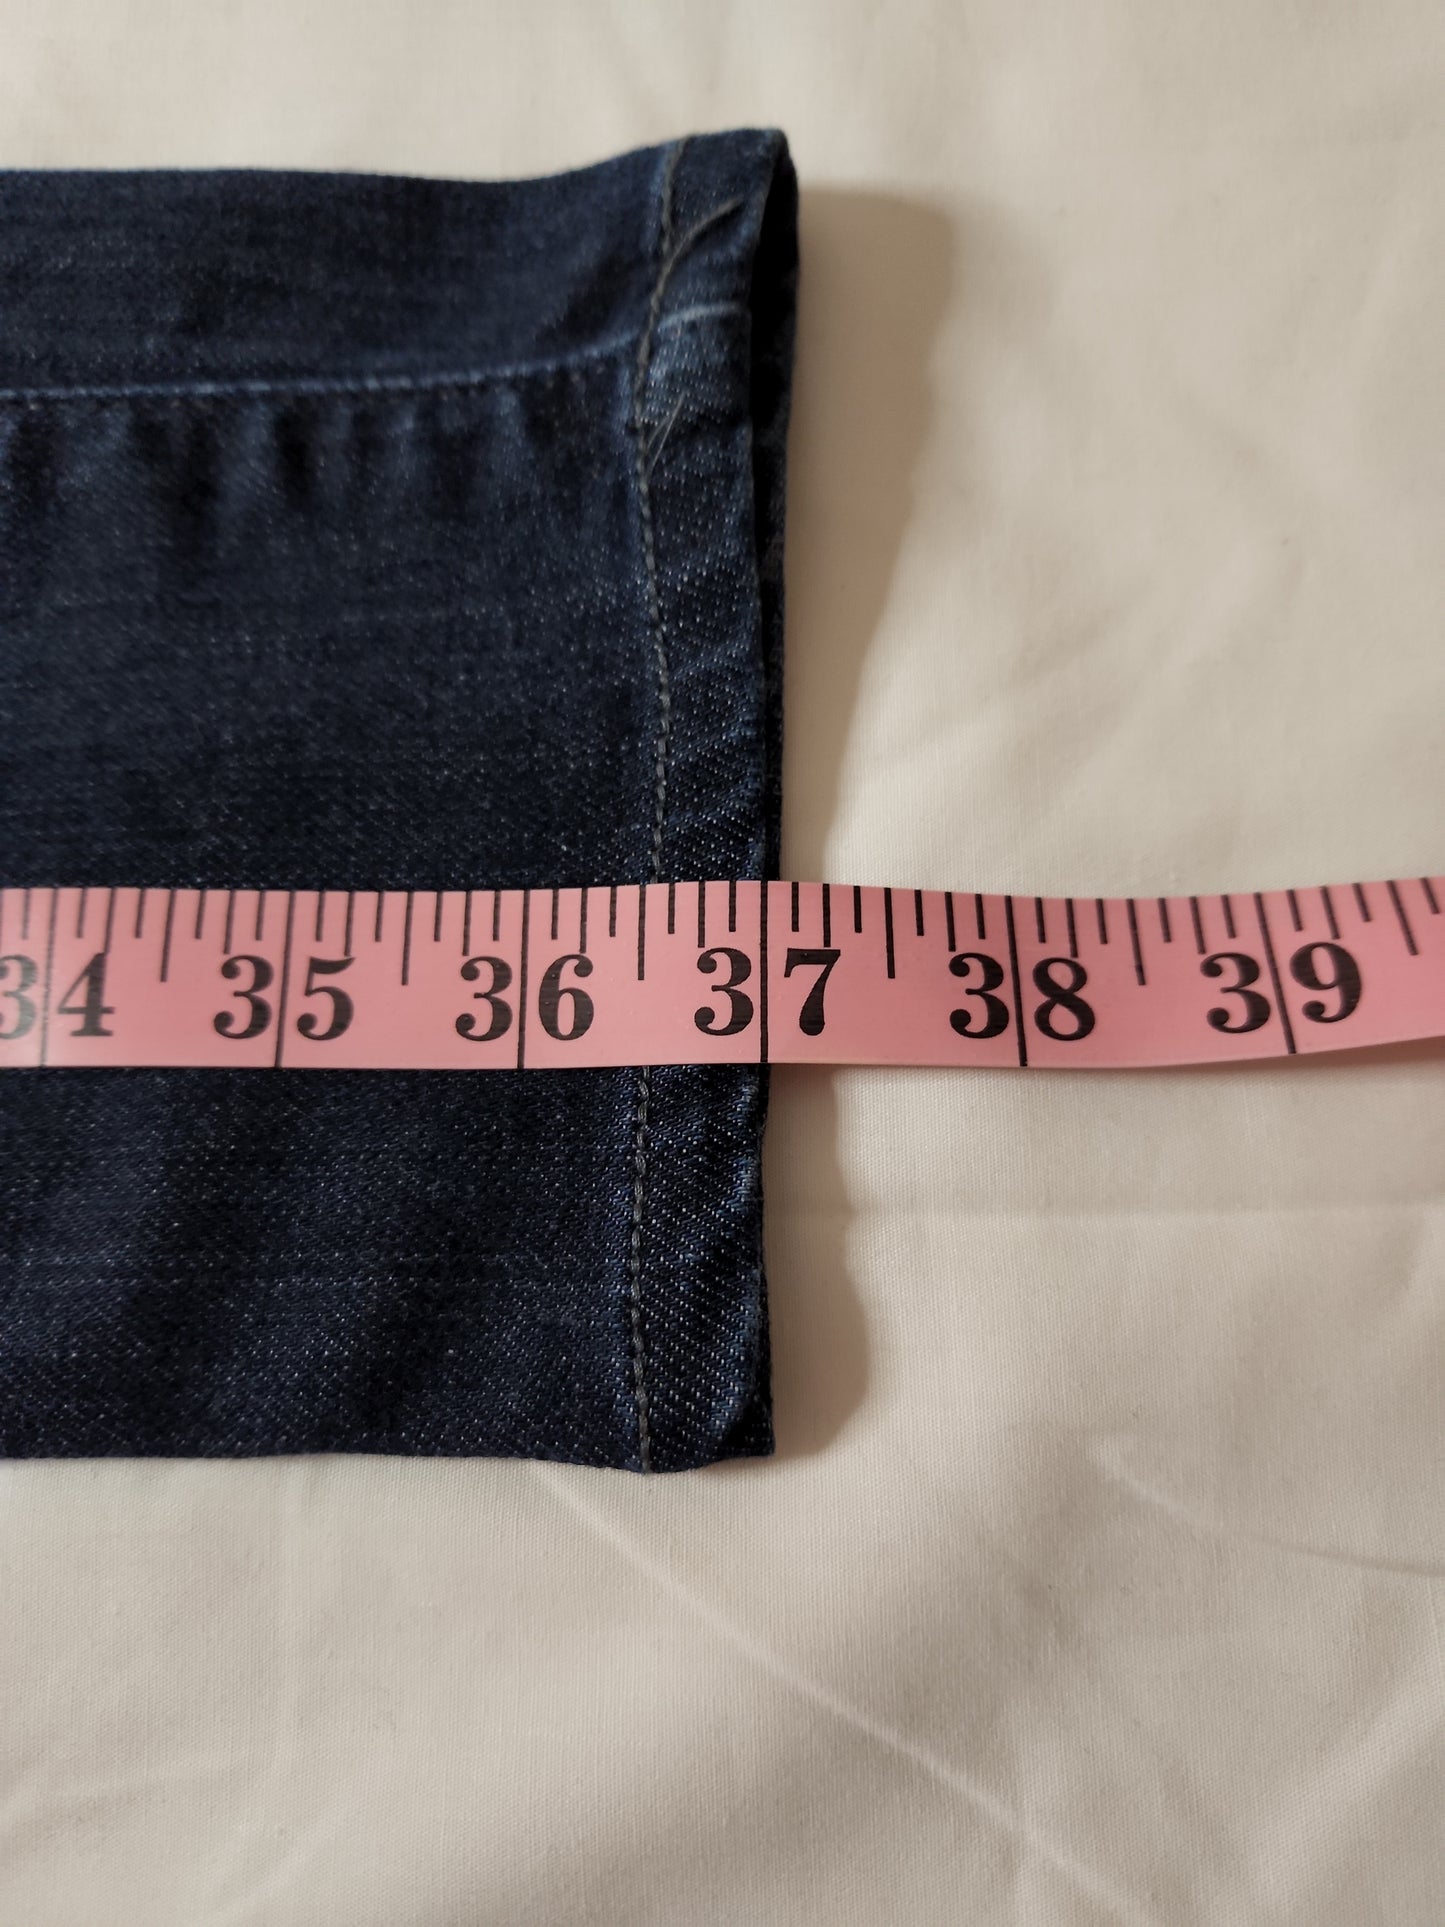 Joes jeans Size 26